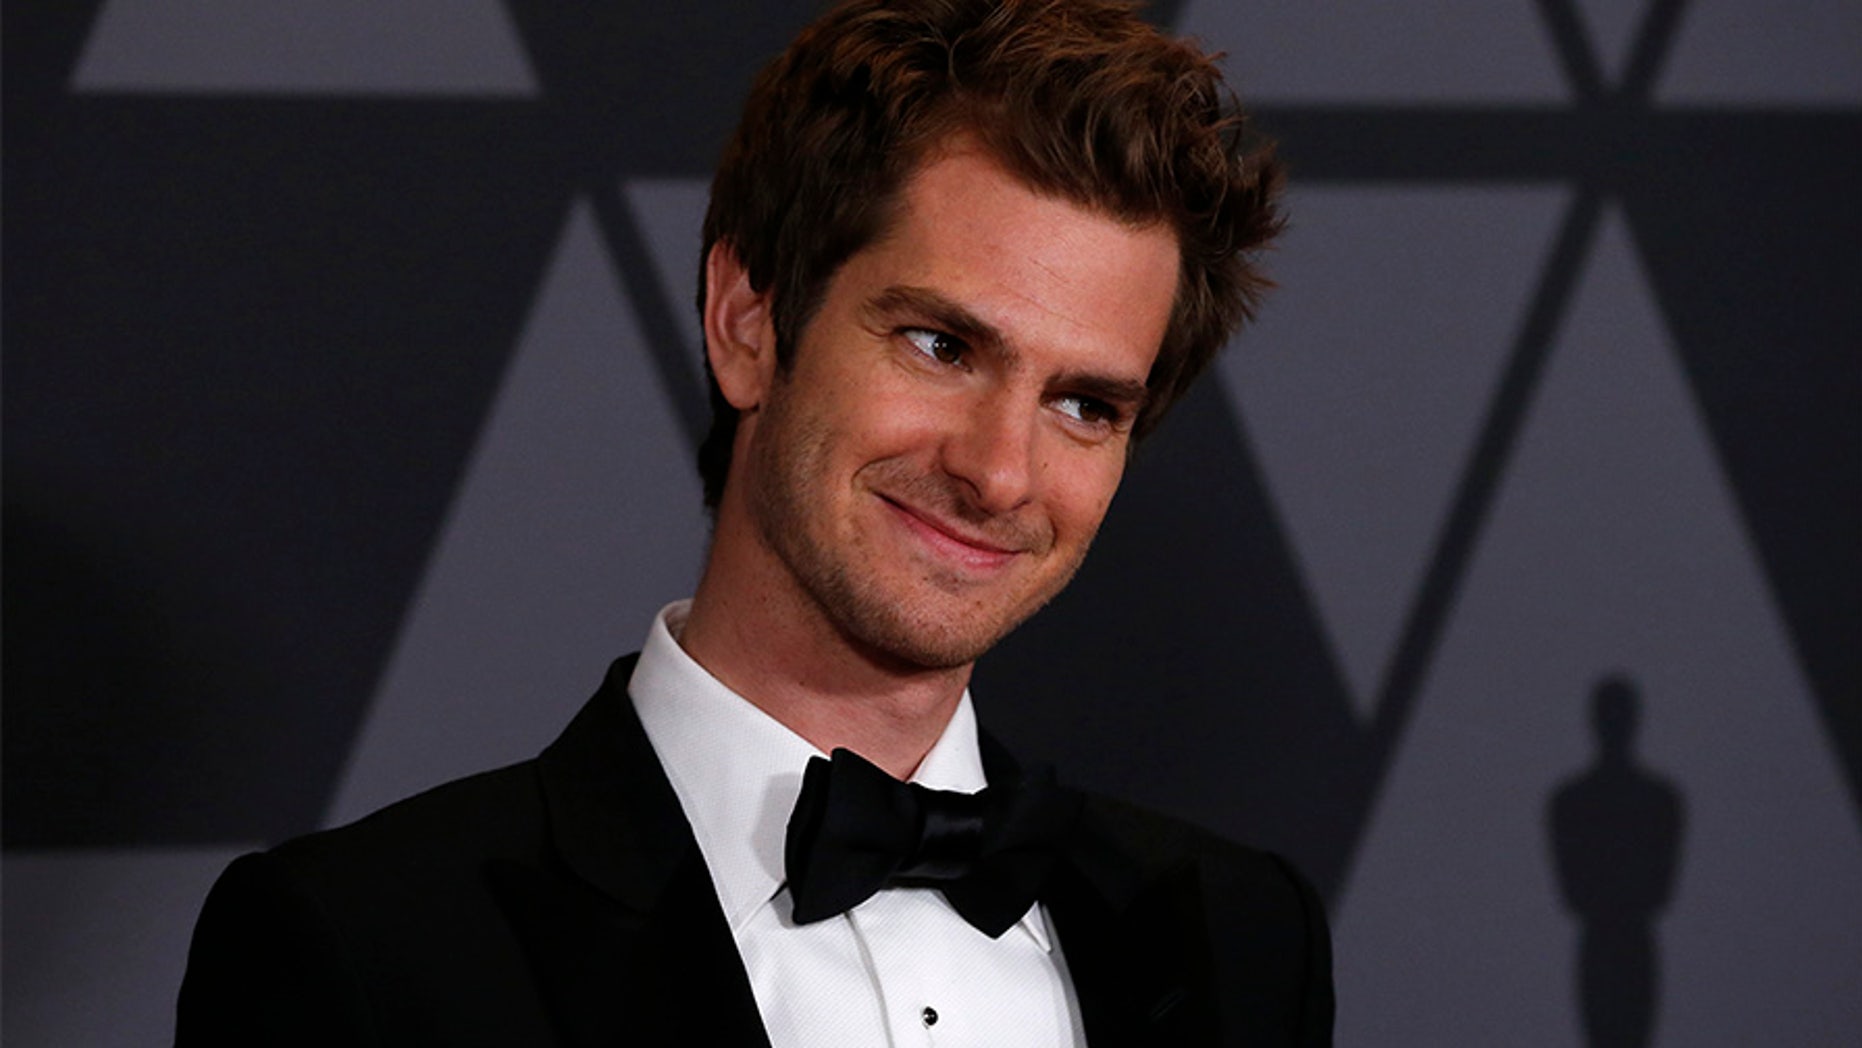 Andrew Garfield Says His First Kiss Was With 30 Girls It Was A Free